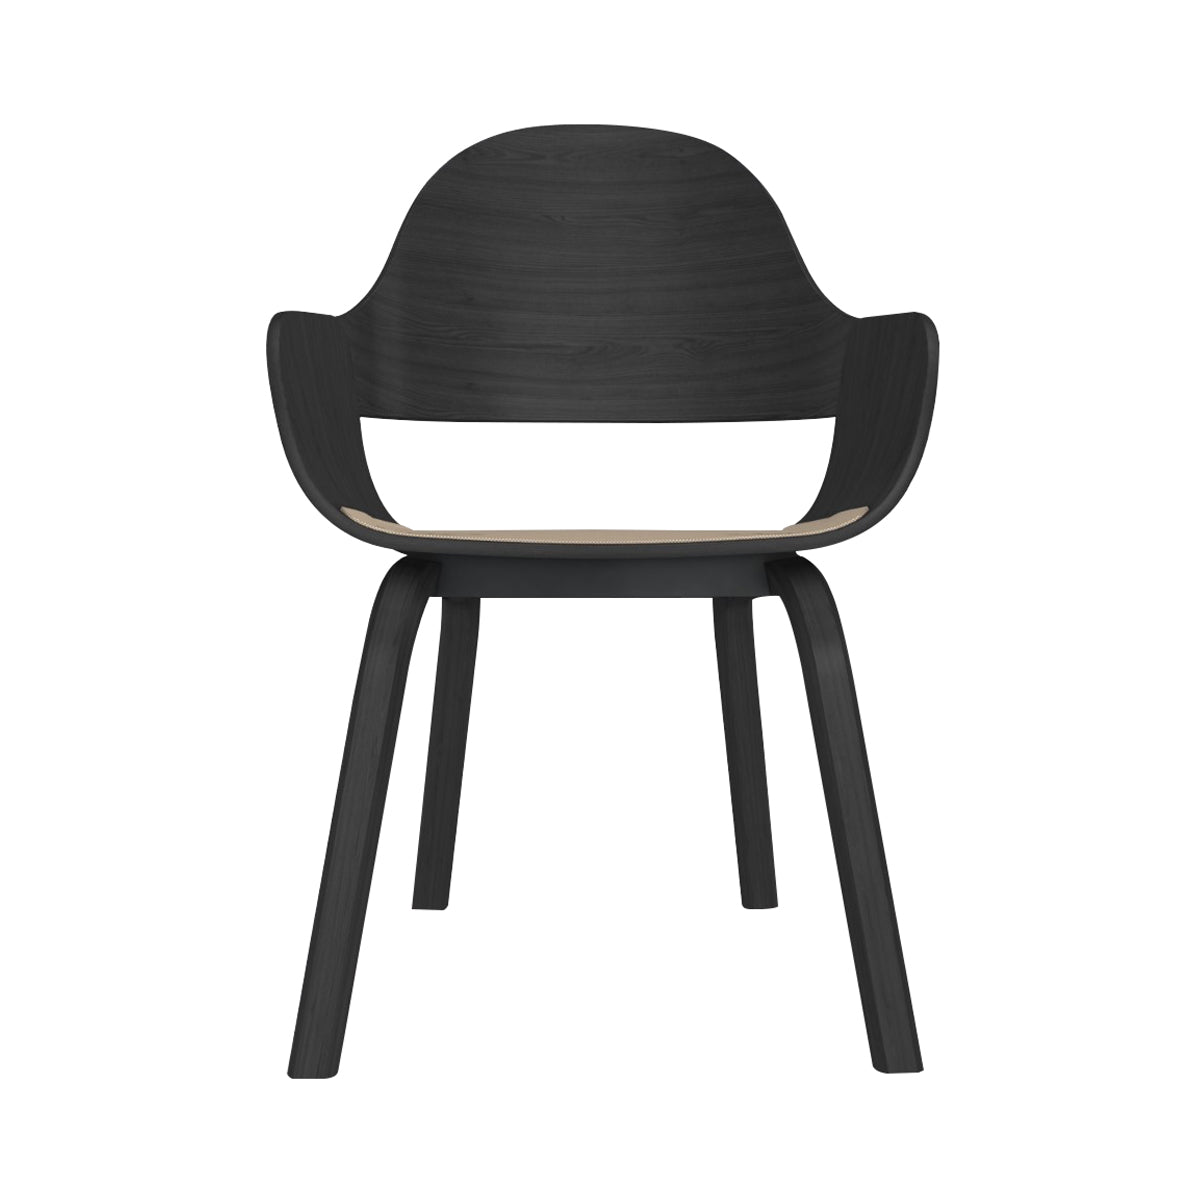 Showtime Nude Chair with Wood Legs: Seat Upholstered + Ash Stained Black + Ash Stained Black